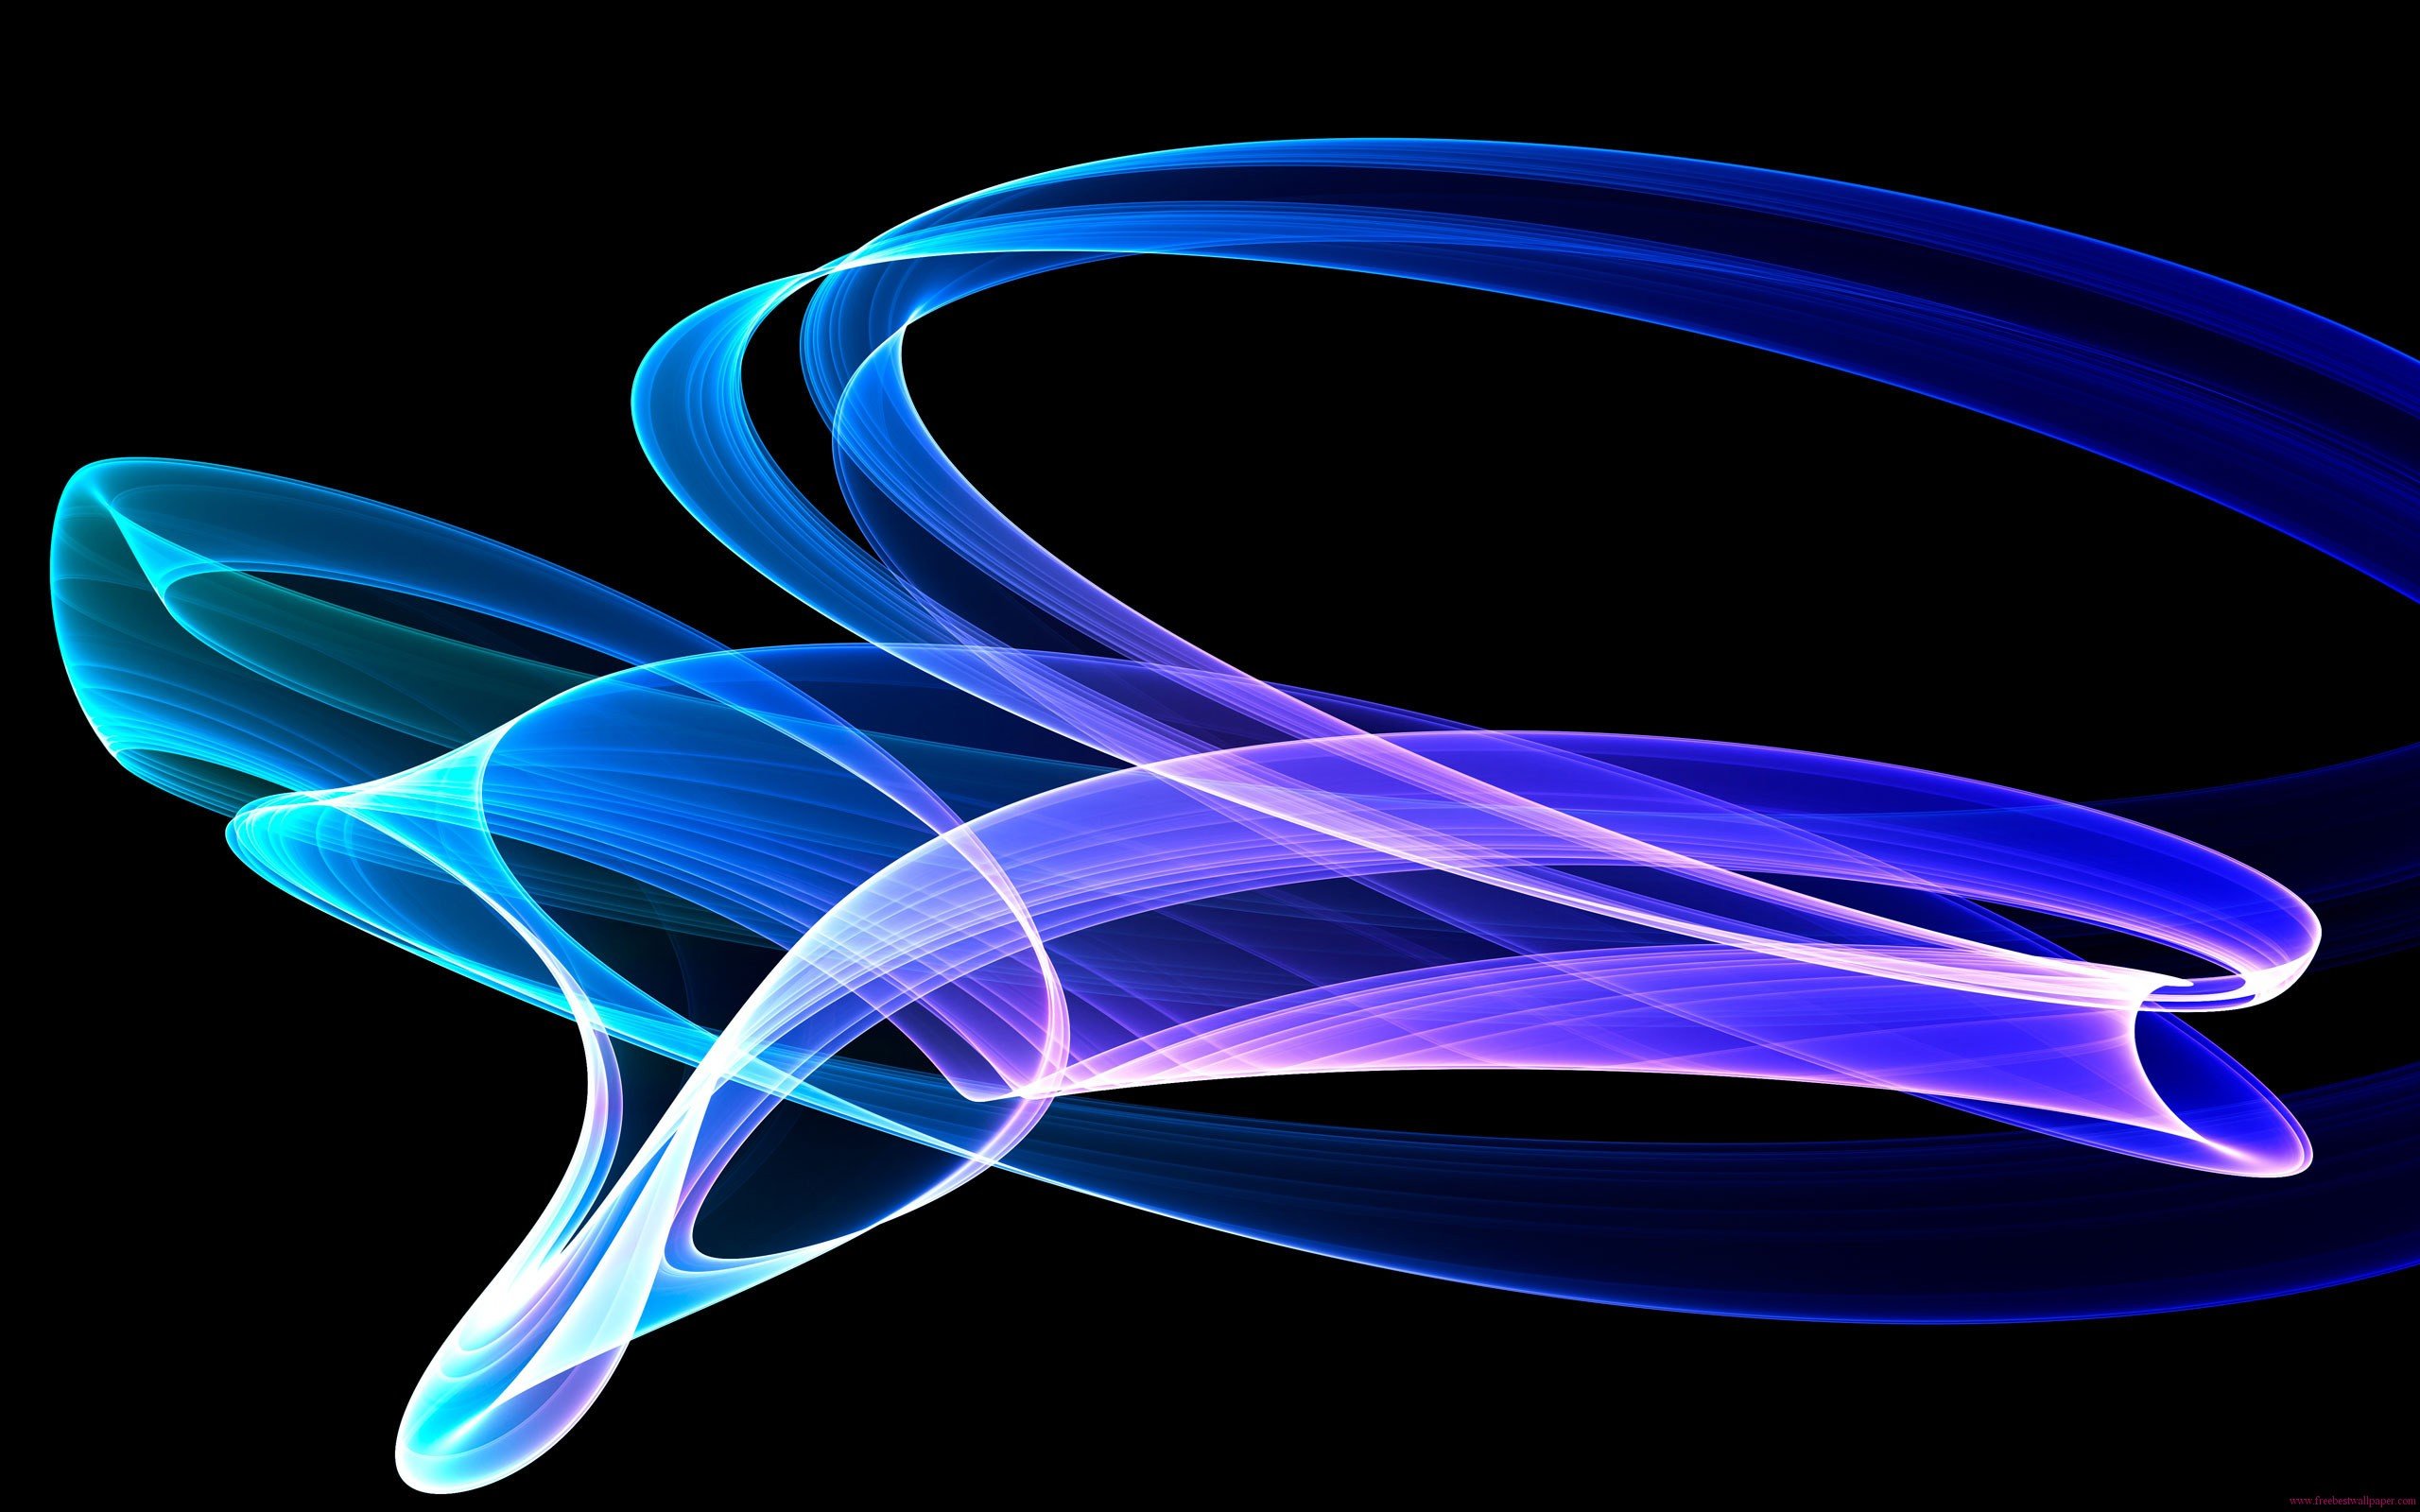 Neon wallpaper   Blue Abstract Wallpapers   HD Wallpapers 94631